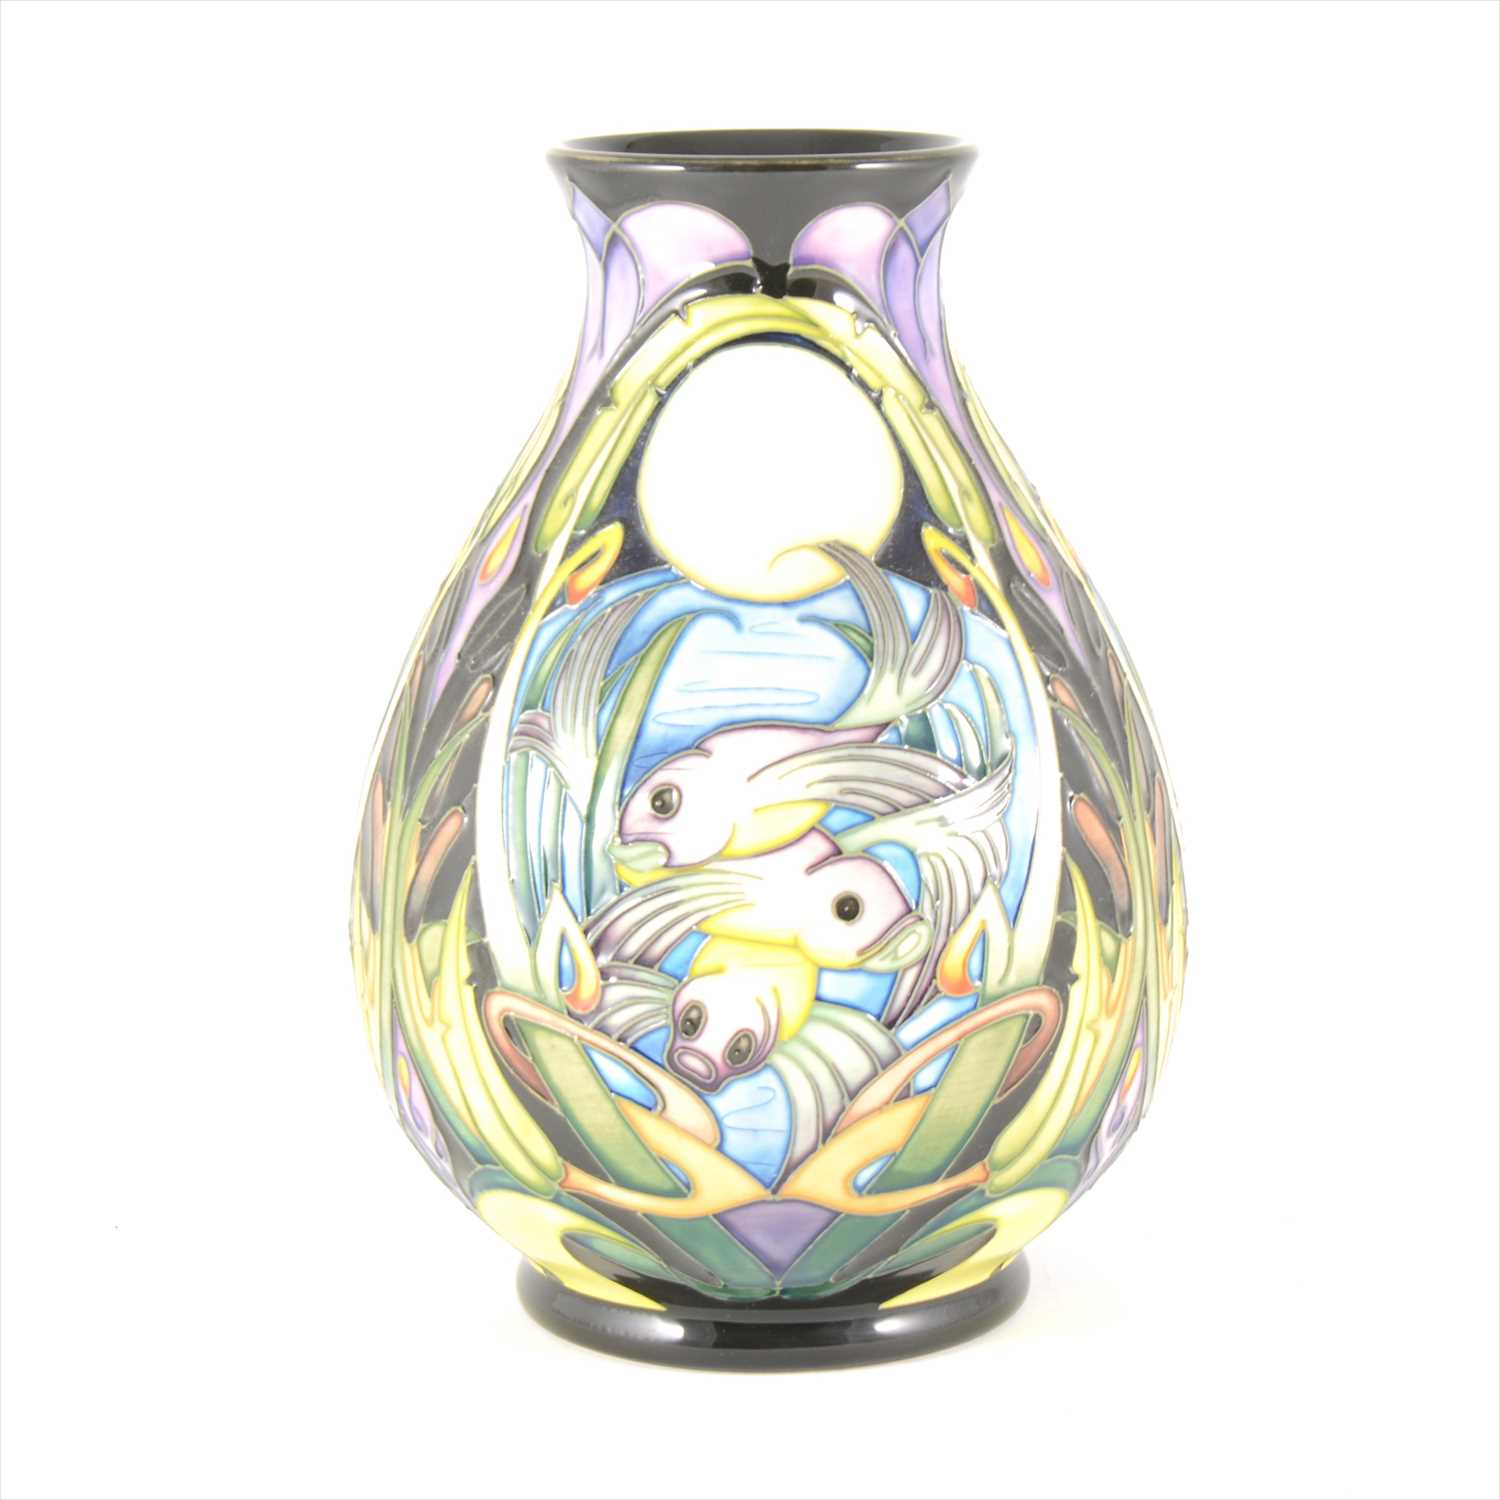 Lot 23 - A 'Shearwater Moon' limited edition Moorcroft Pottery vase, designed by Emma Bossons